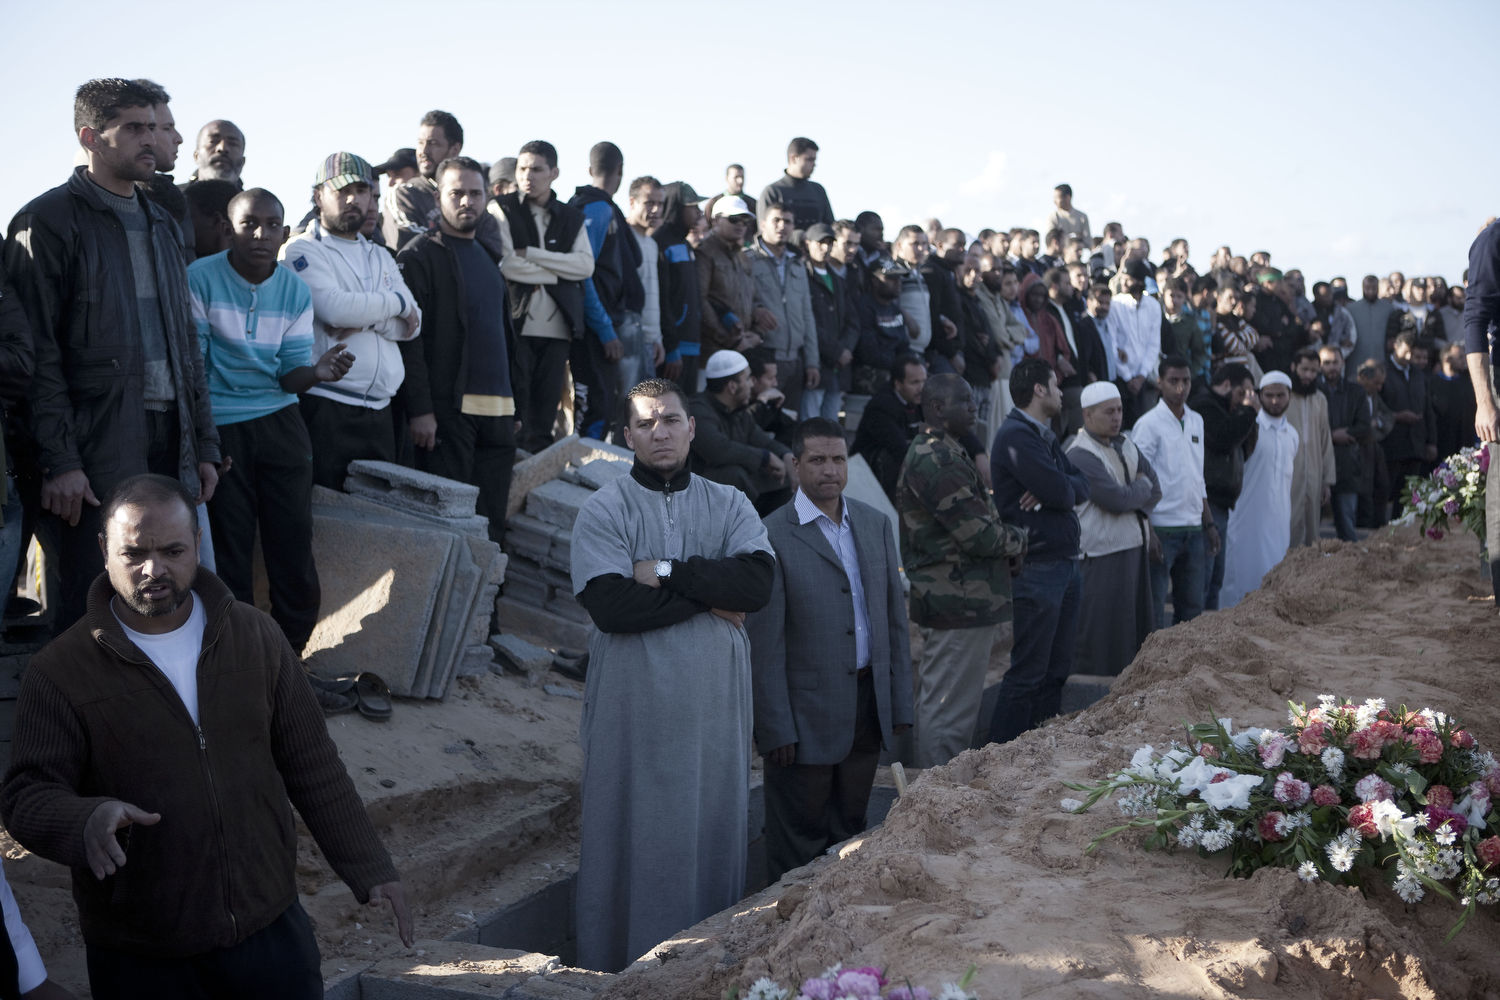 Tripoli residents bury some bombing victims at the martyrs cemetery in Tripoli